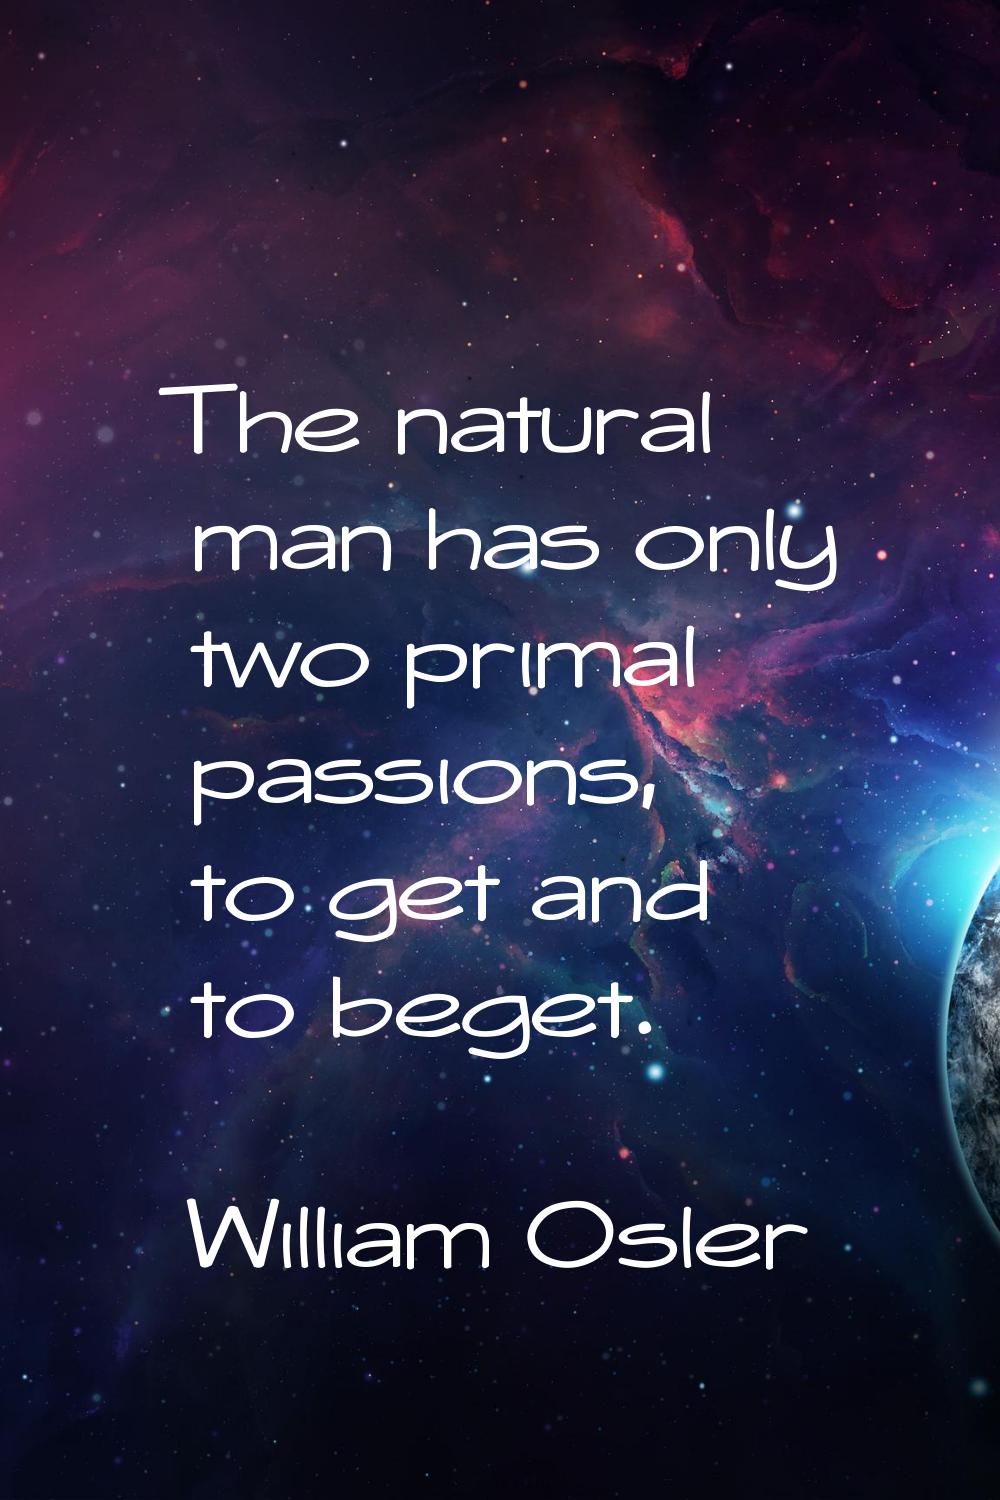 The natural man has only two primal passions, to get and to beget.